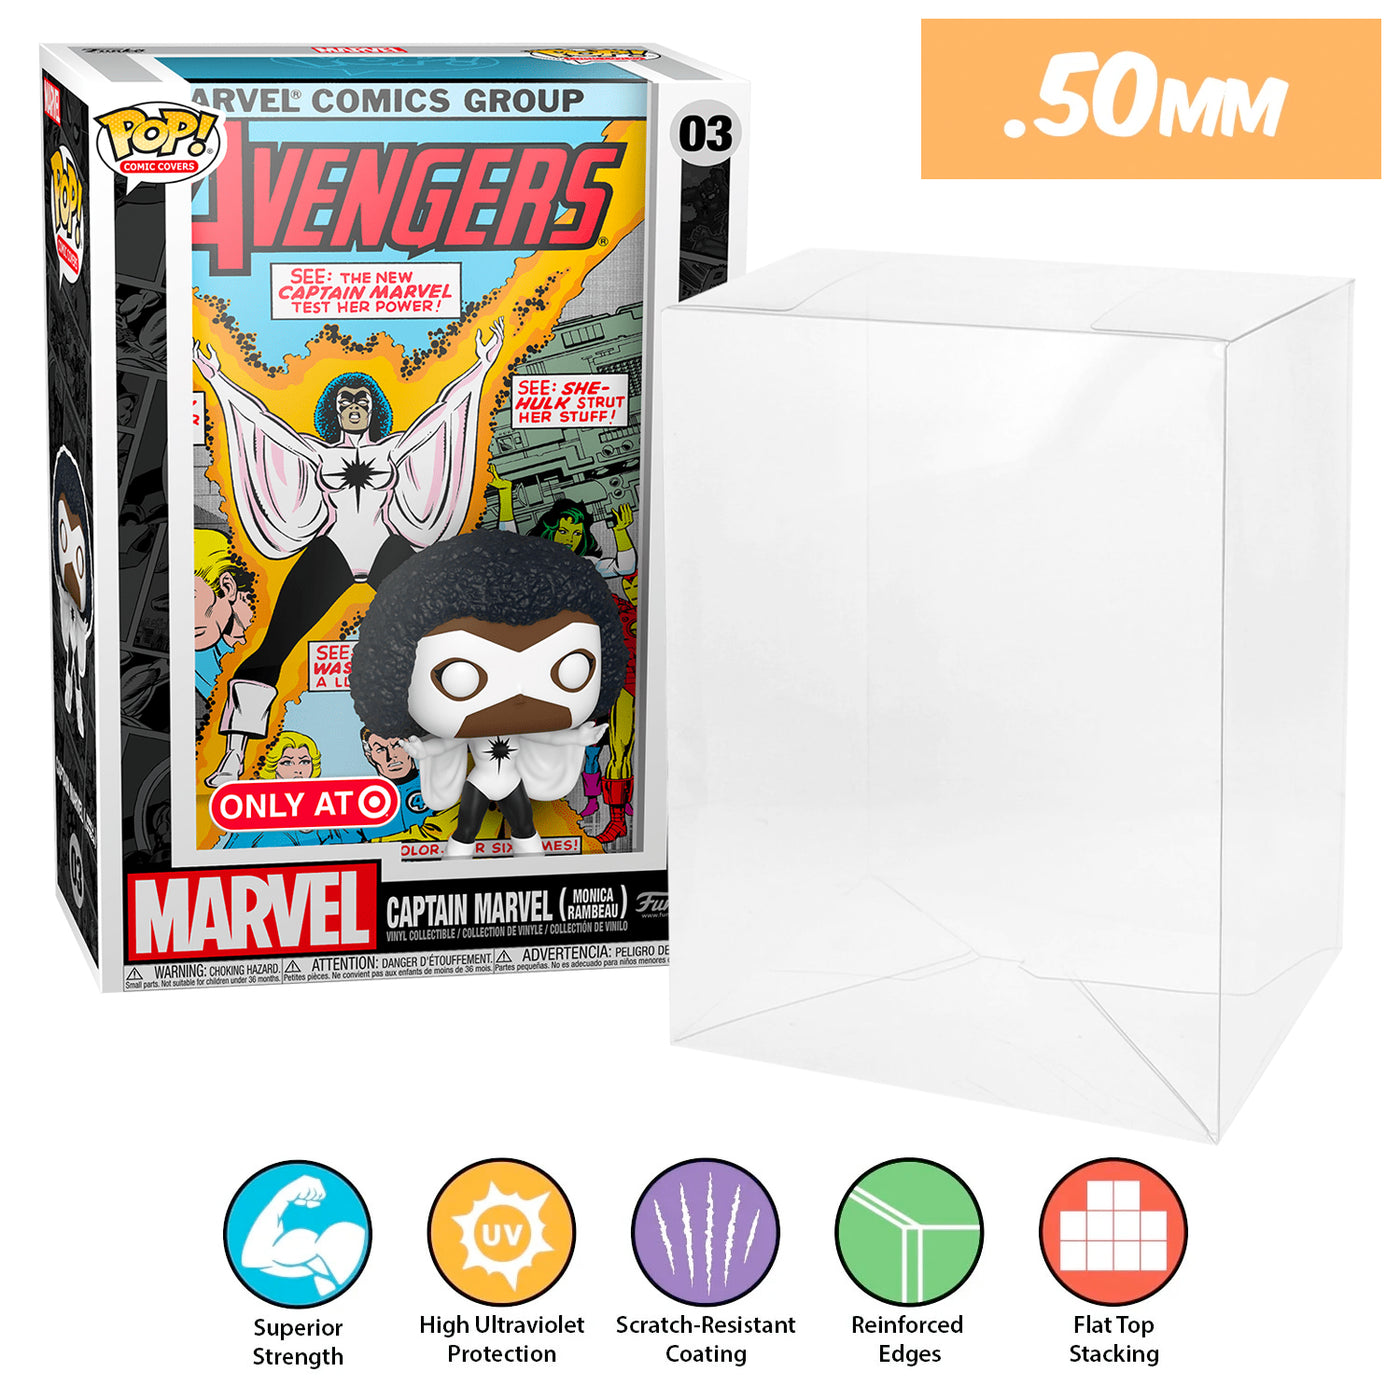 marvel captain marvel monica target pop comic covers best funko pop protectors thick strong uv scratch flat top stack vinyl display geek plastic shield vaulted eco armor fits collect protect display case kollector protector